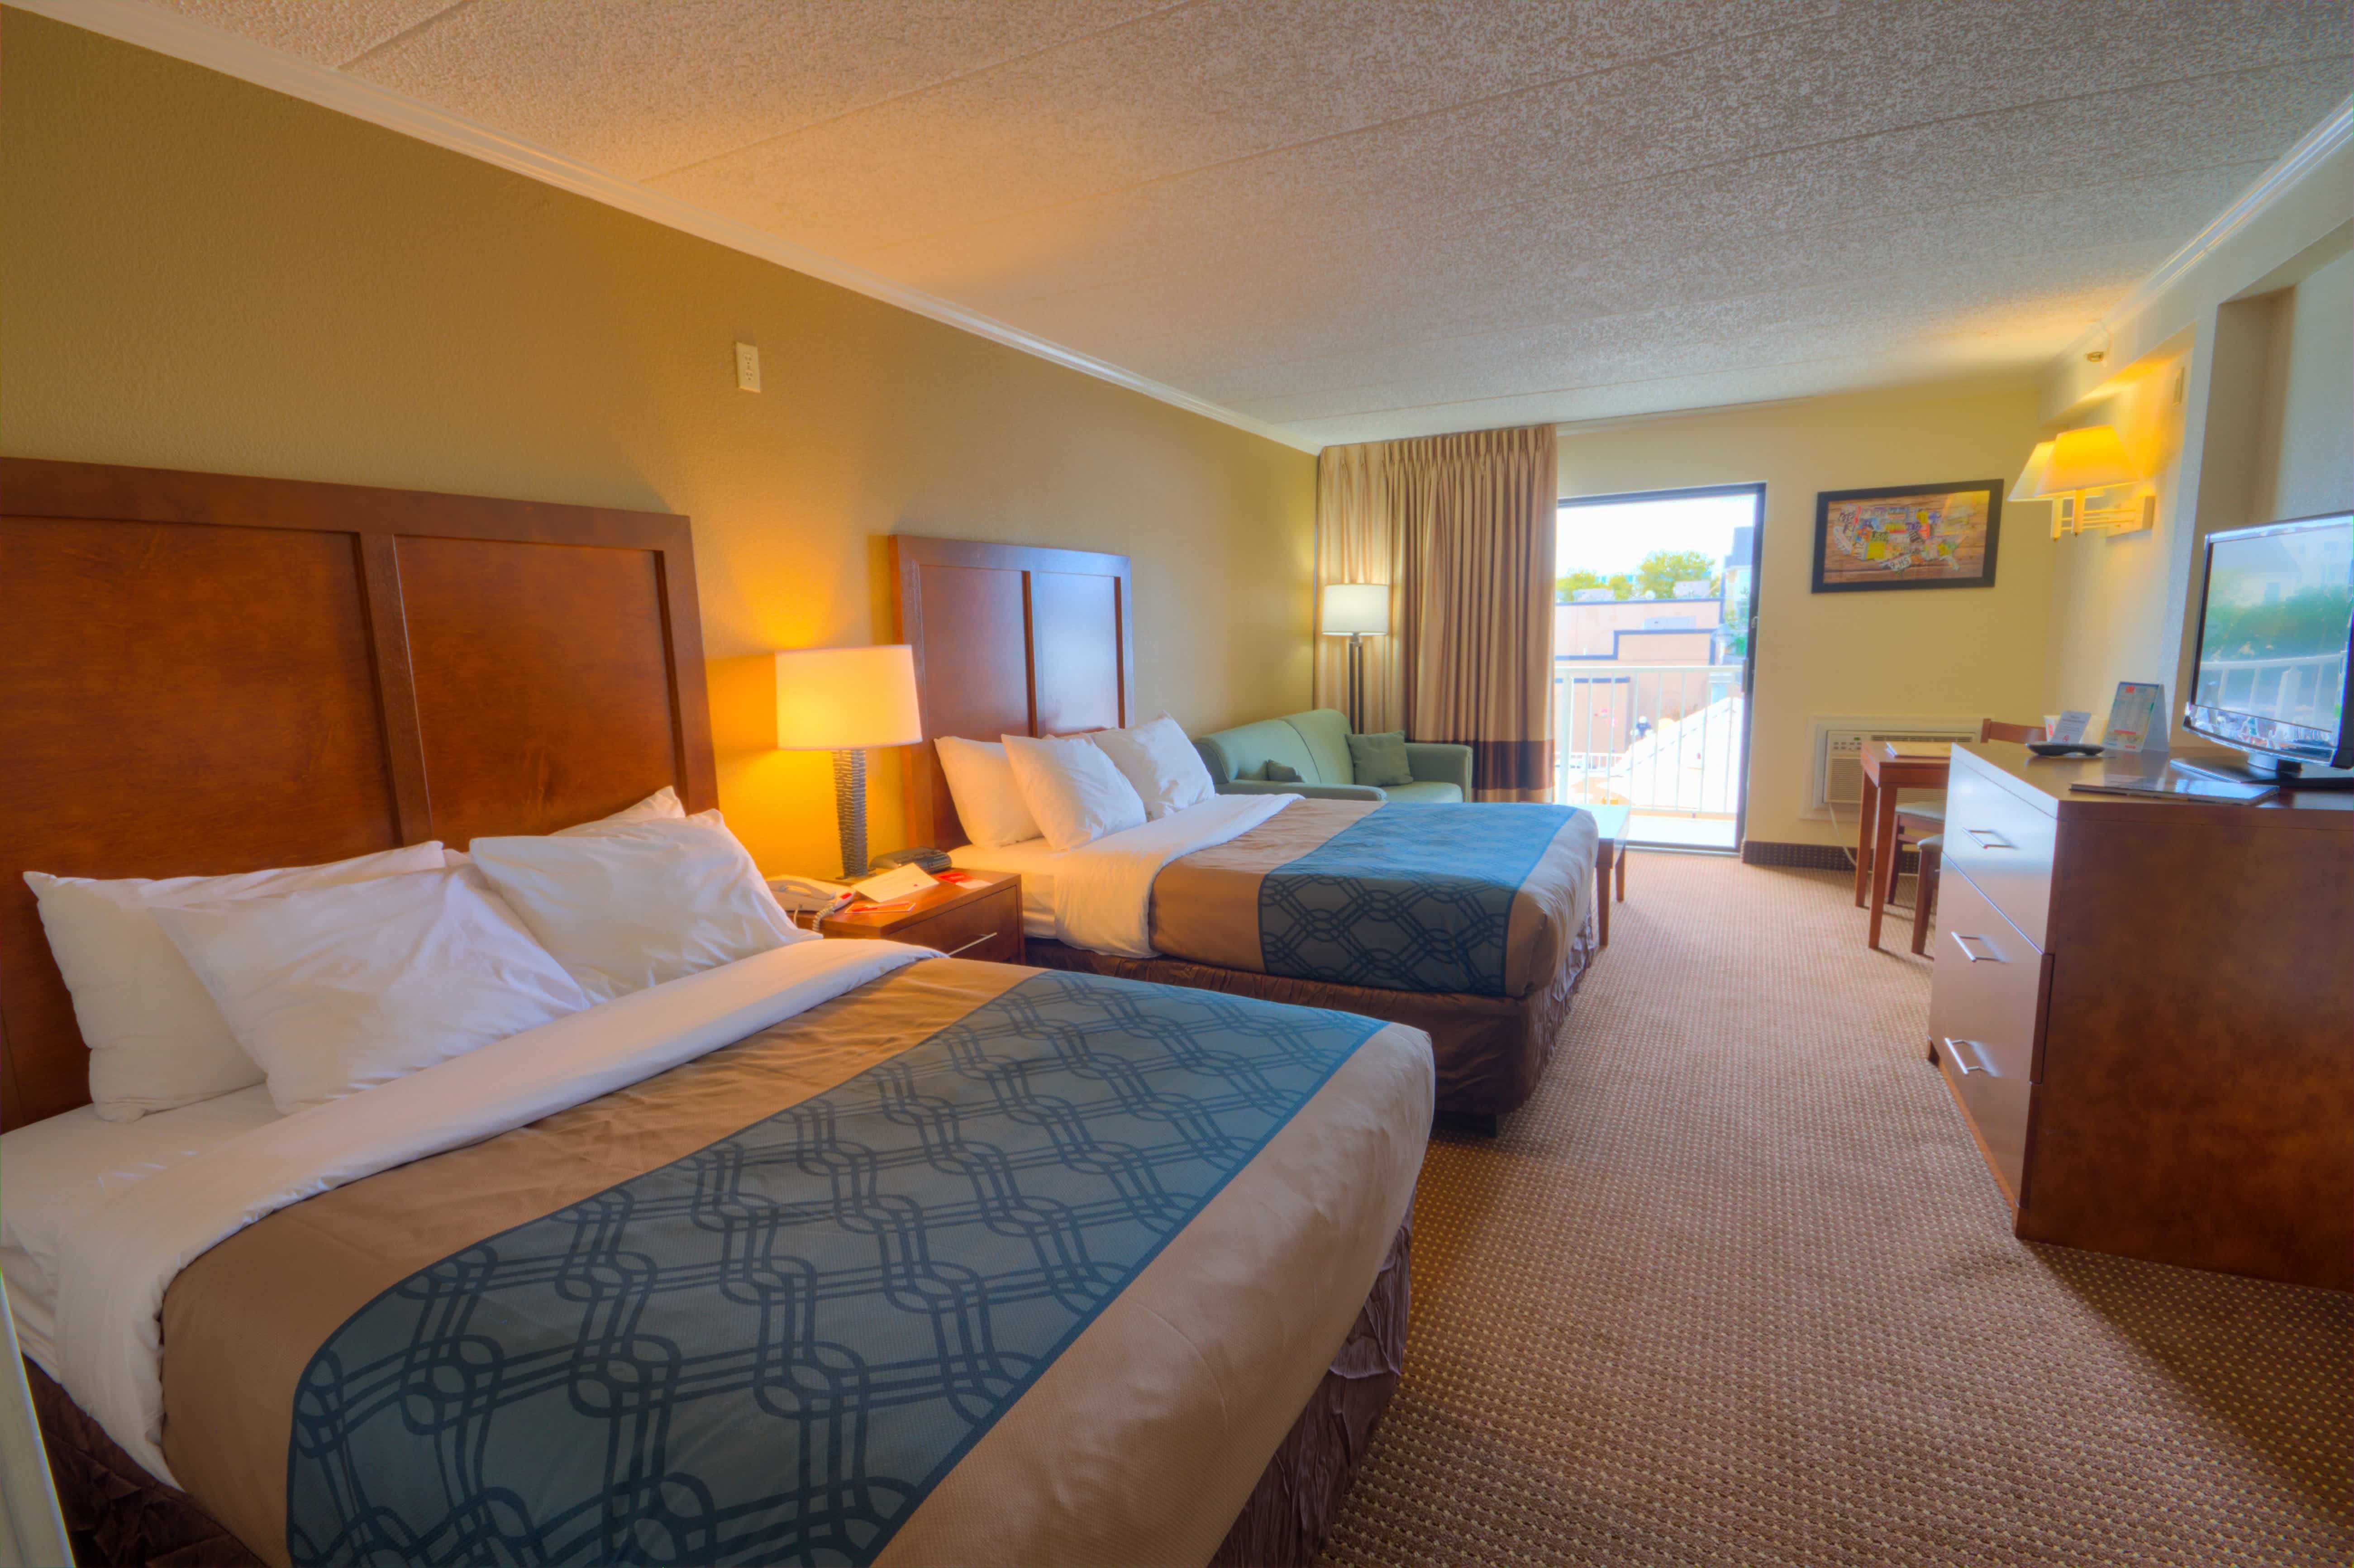 Two double beds in a clean hotel room in ocean city Maryland 